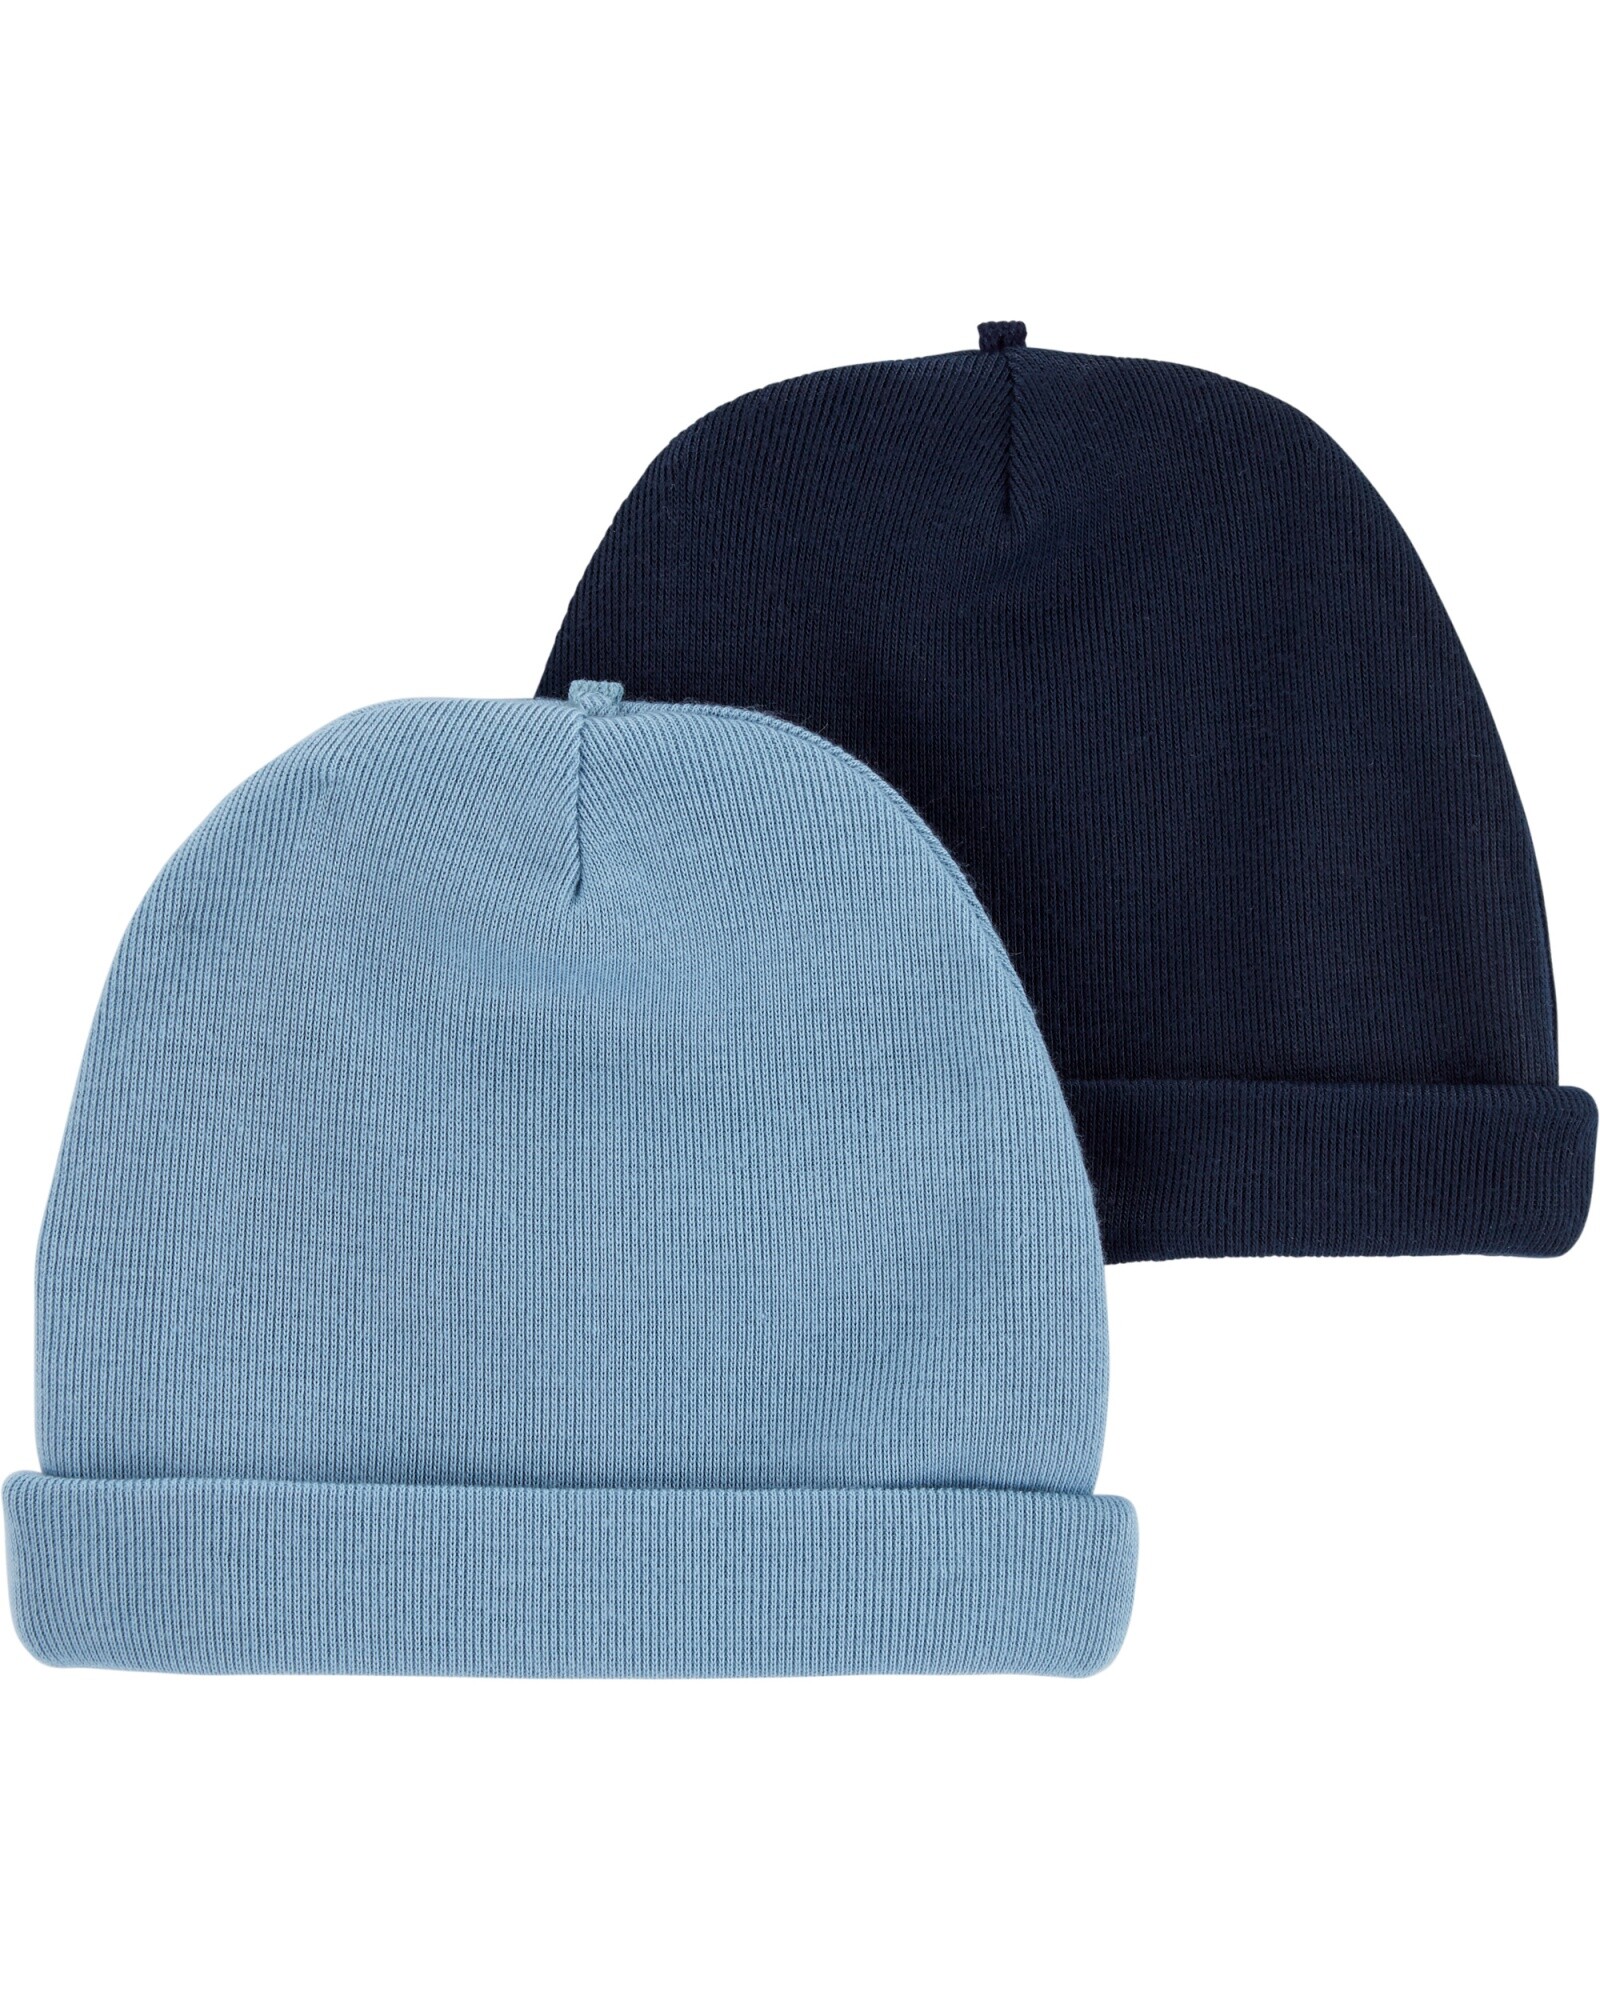 Pack Dos Gorros Sin color